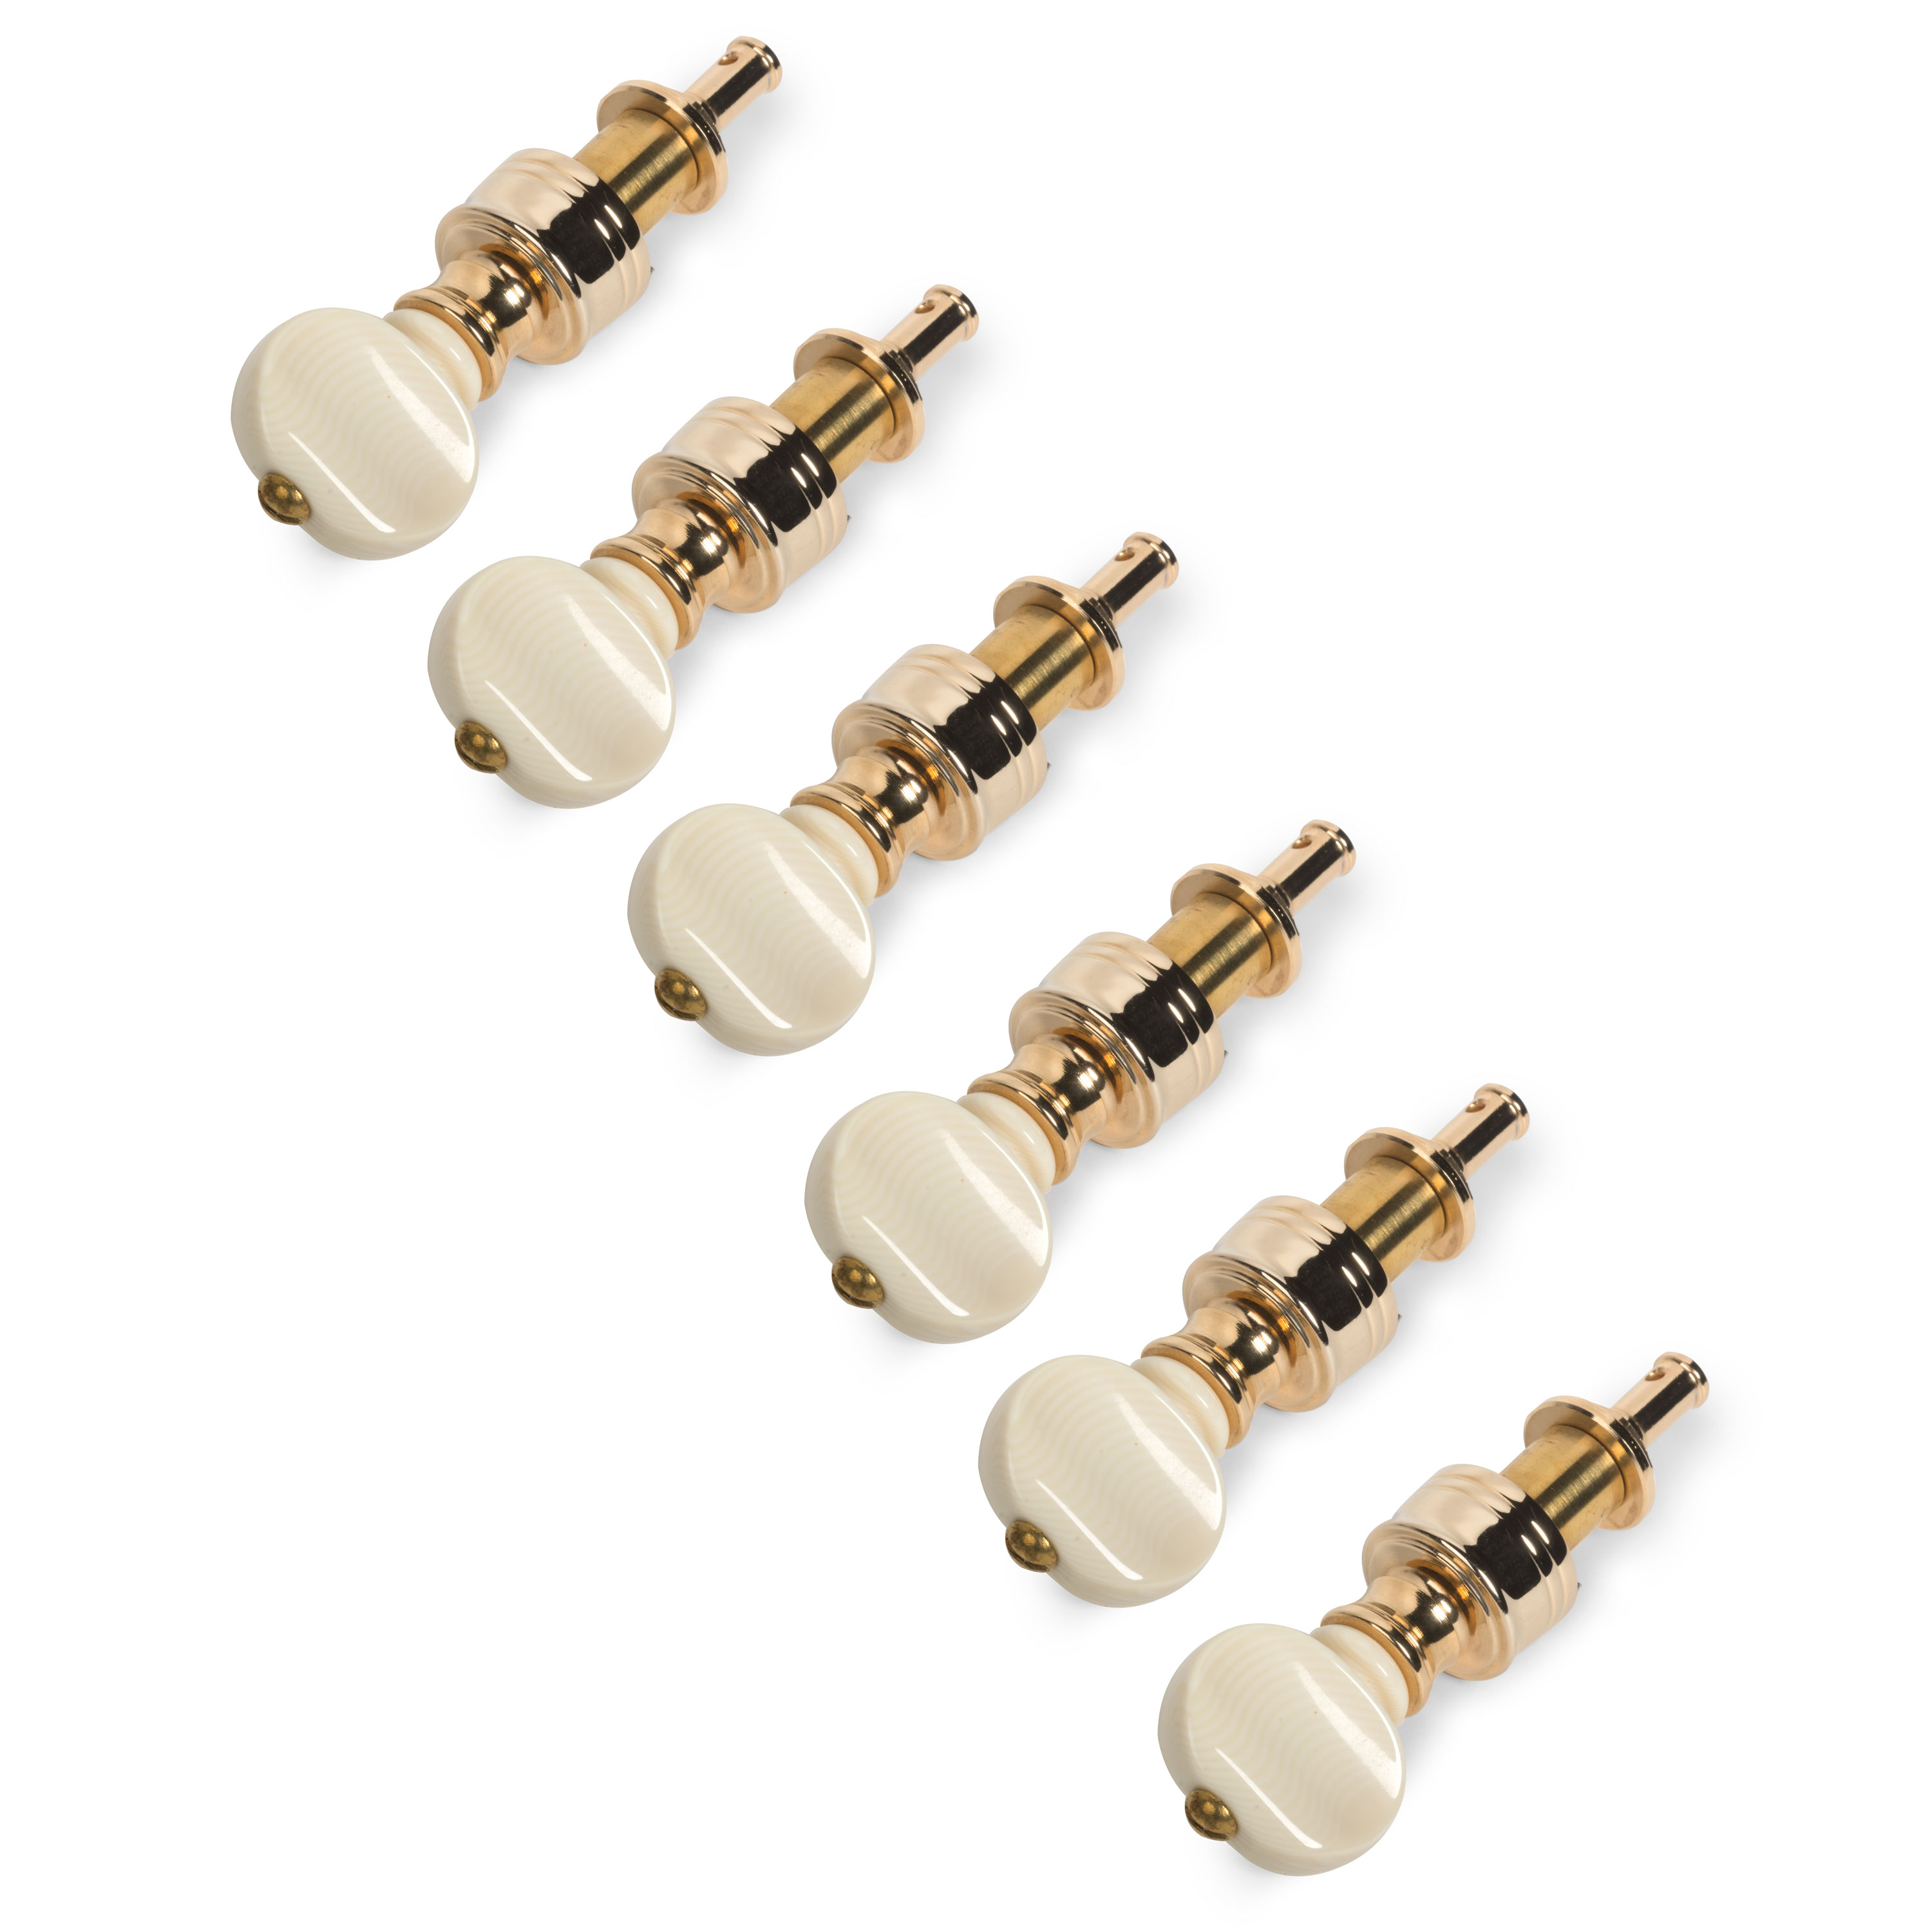 Rickard Cyclone High Ratio Tuning Pegs for Guitar with Ivoroid Knobs, Set of 6